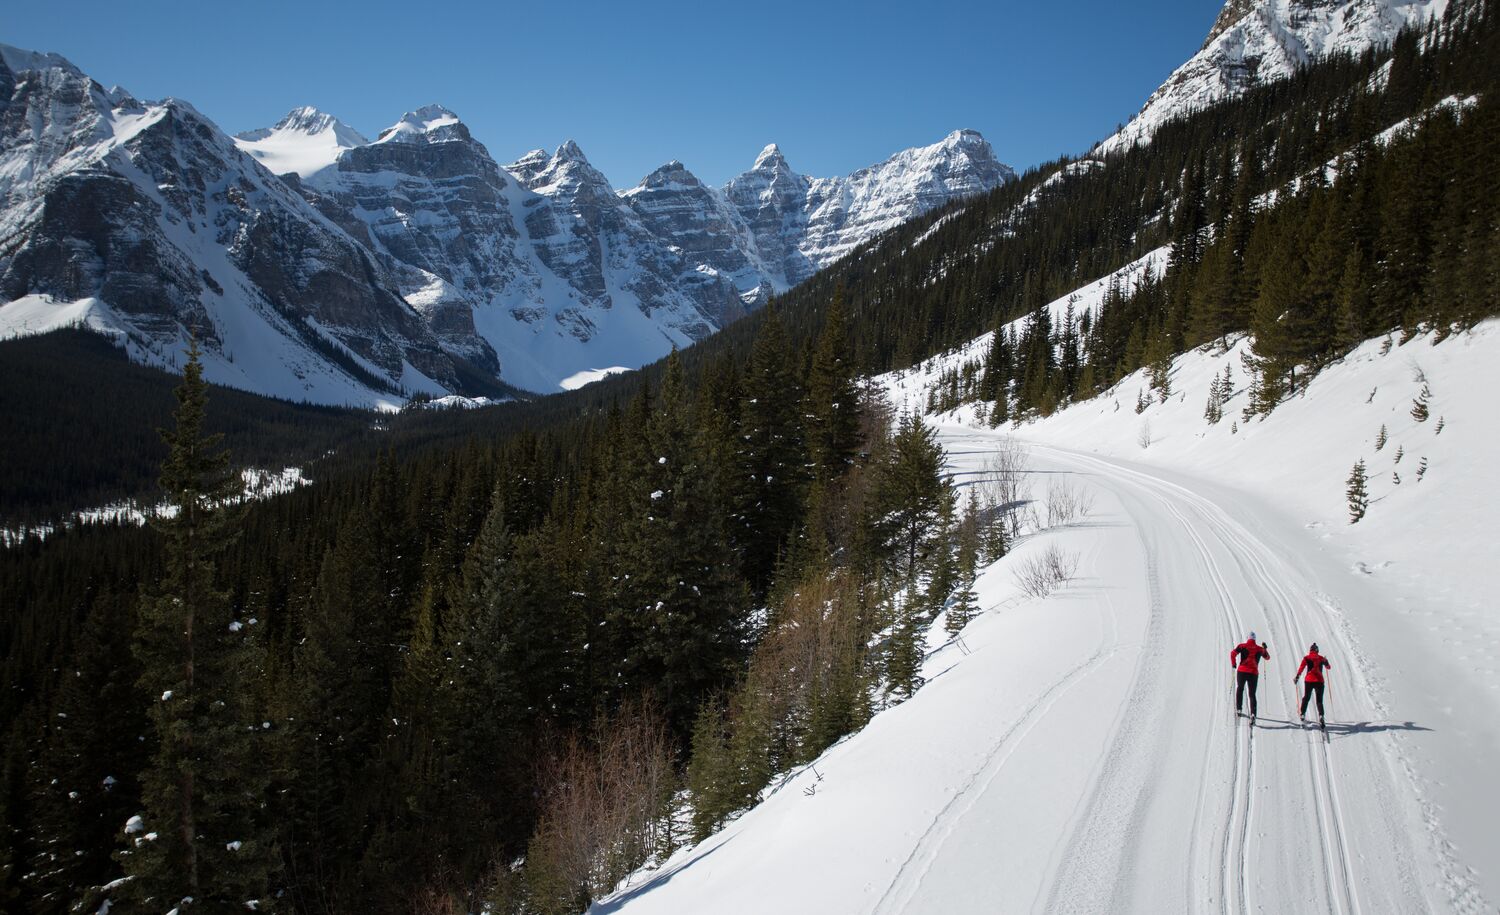 Moraine Lake Road cross country skiing in Banff National Park.